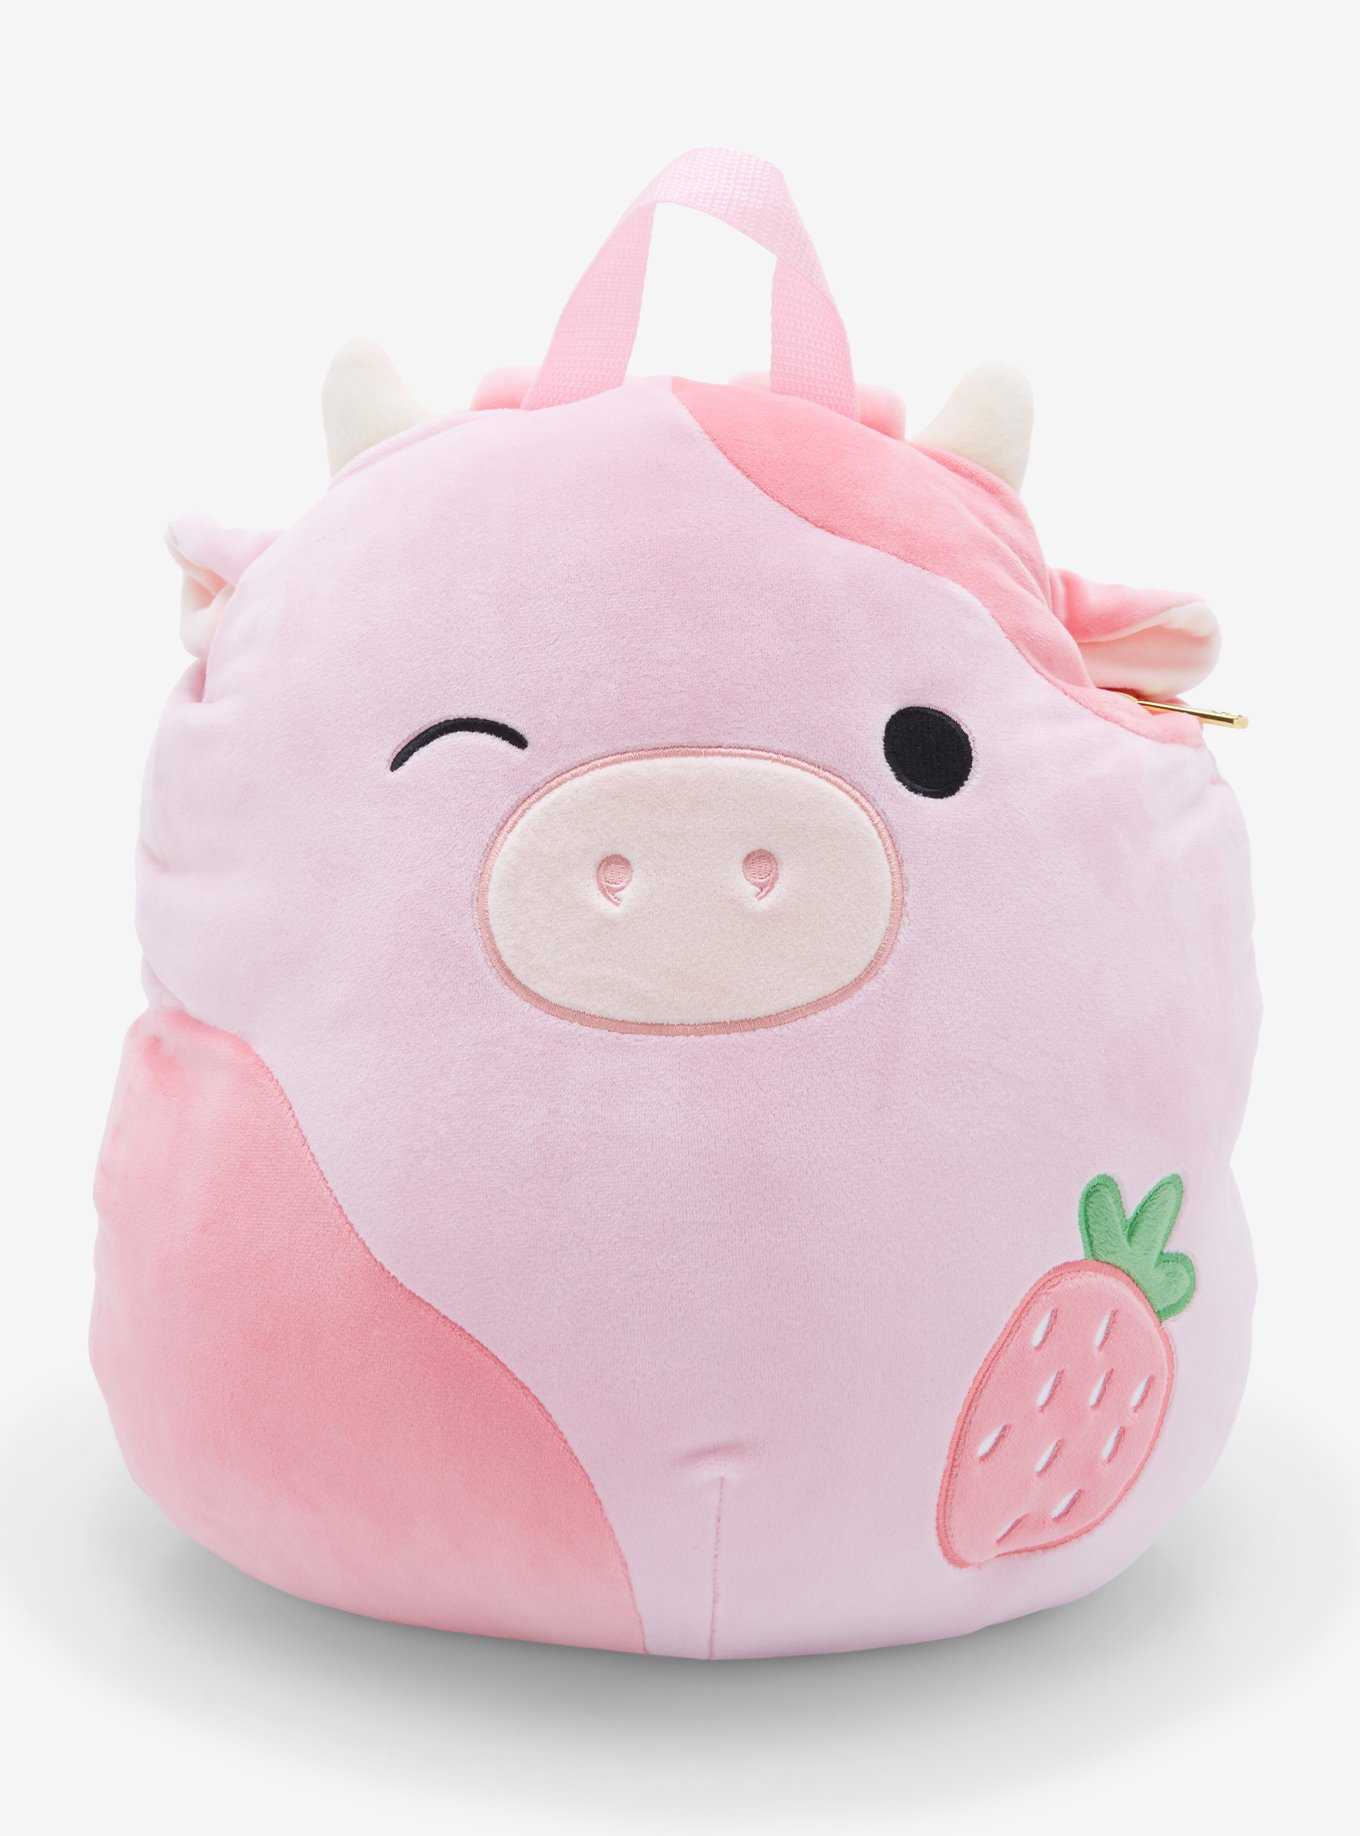 Squishmallows Strawberry Cow Plush Backpack, , hi-res